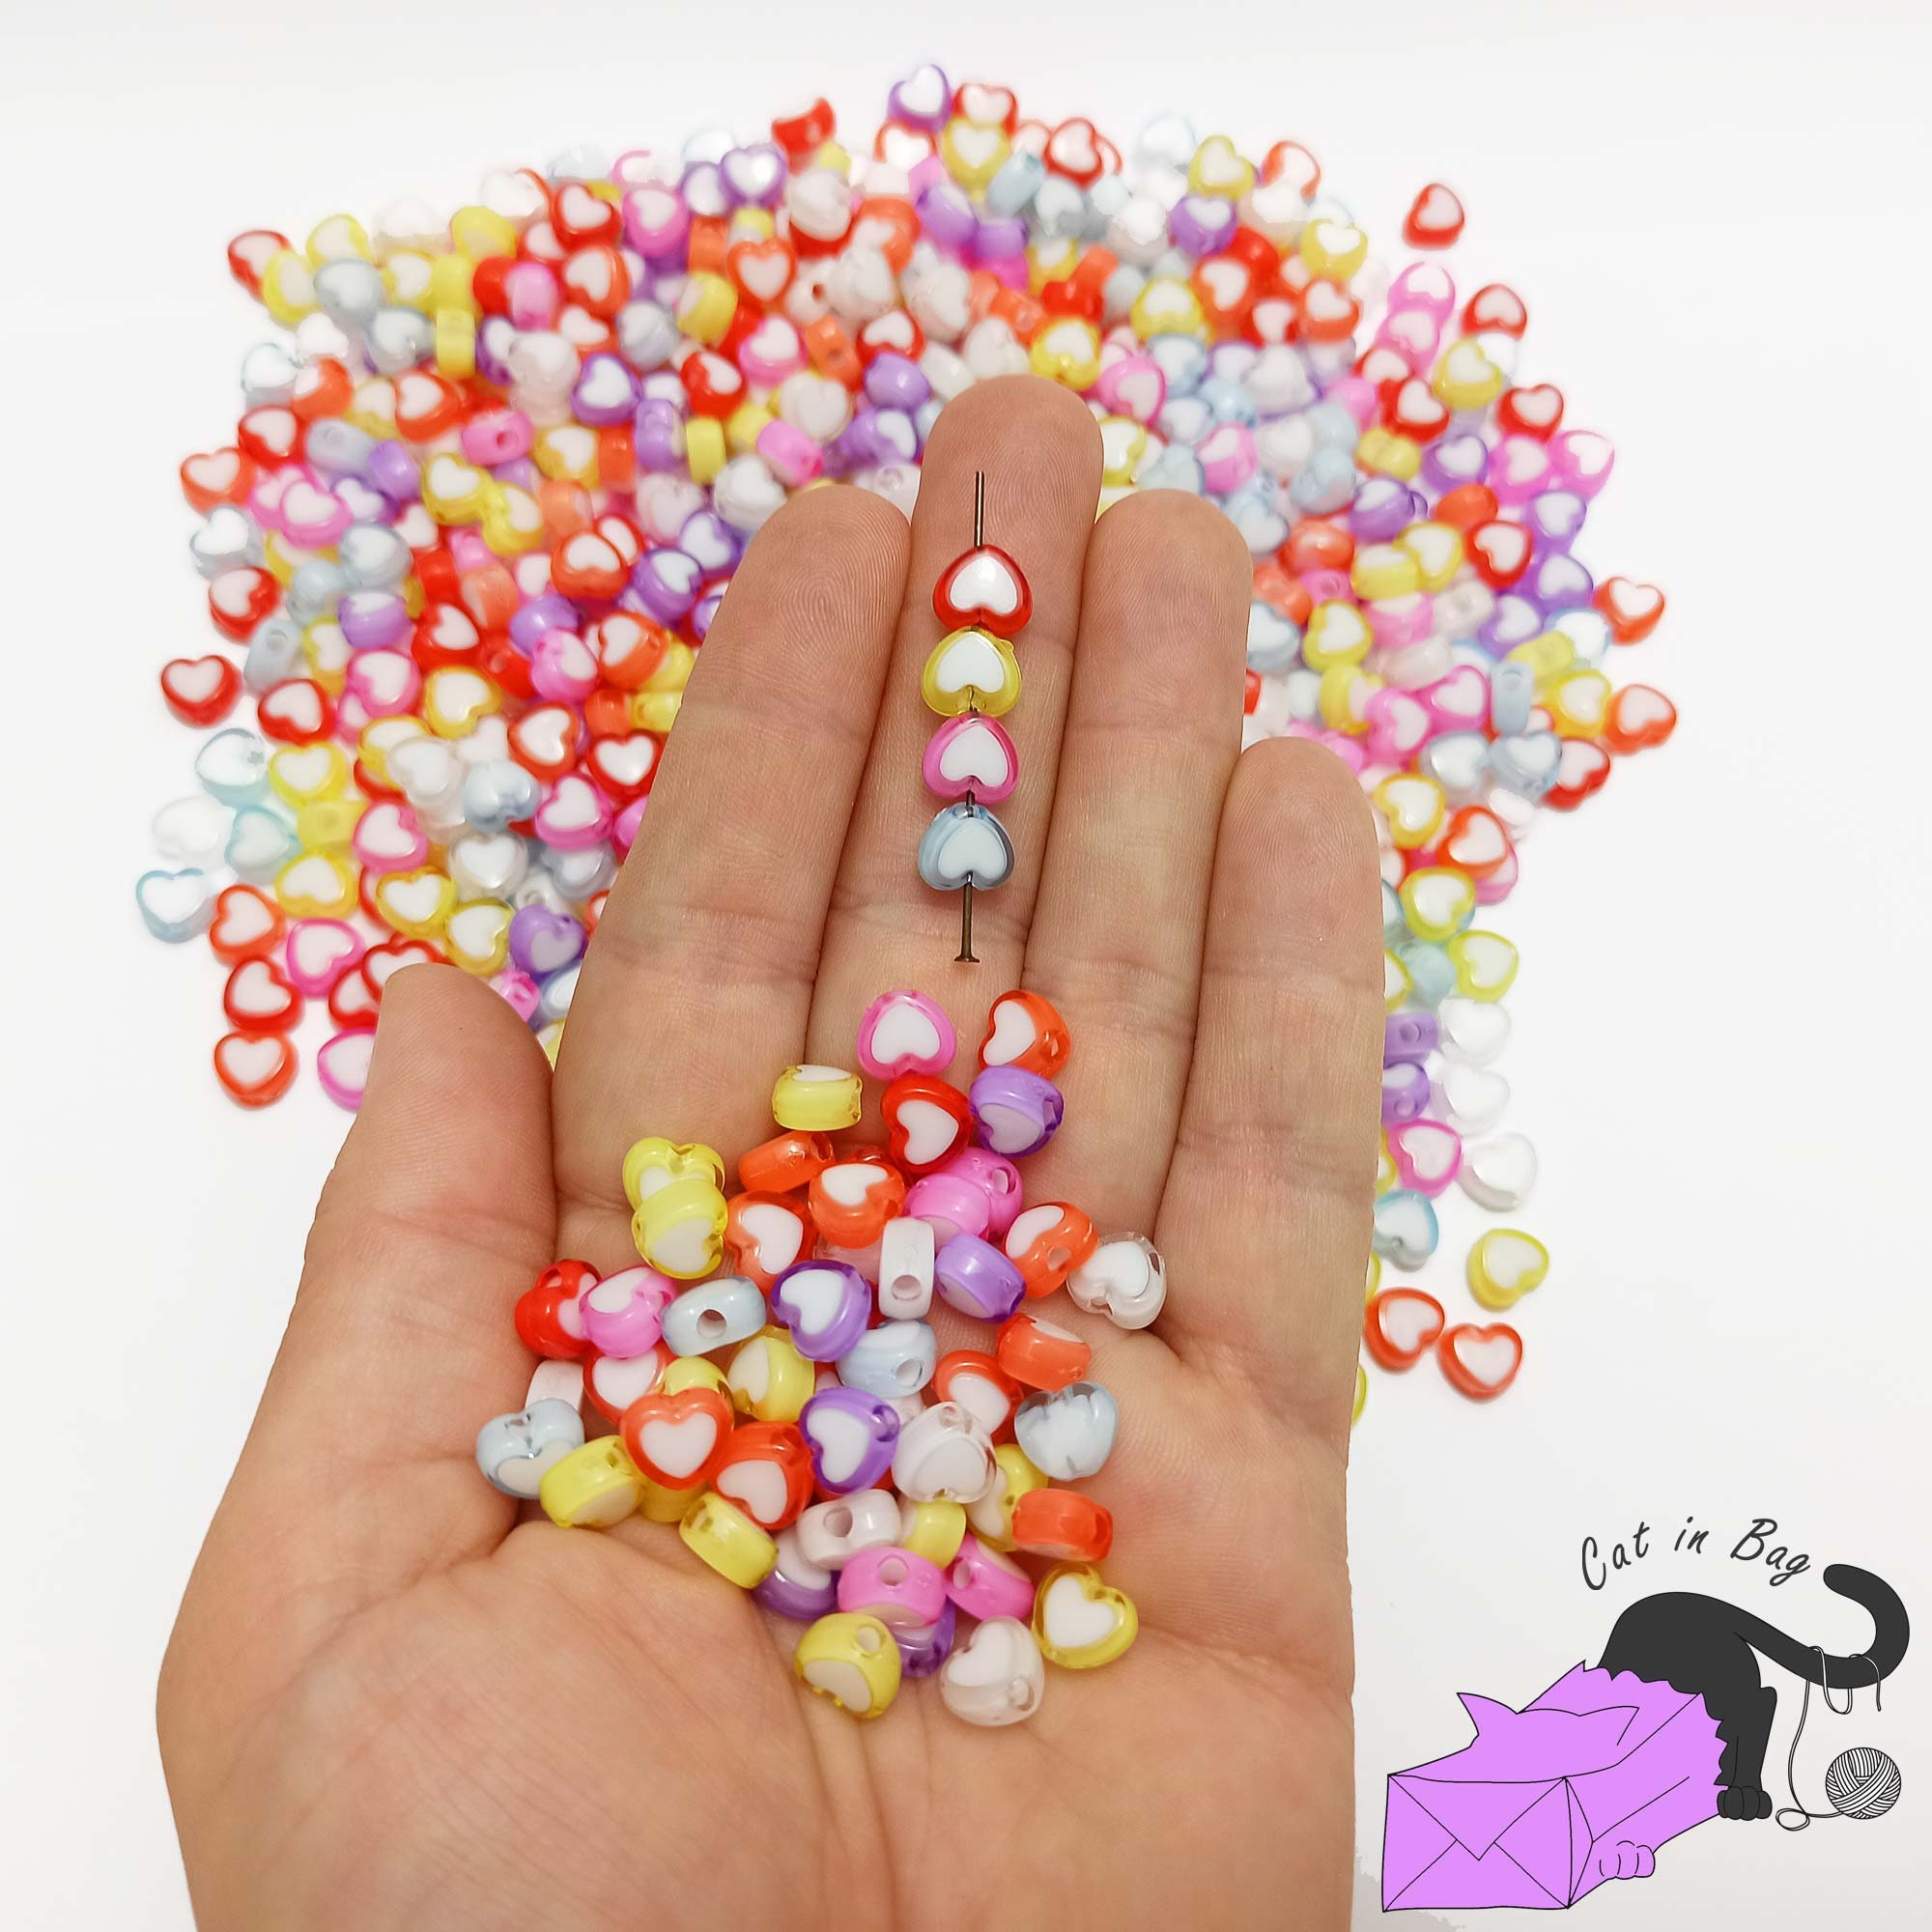 Kisor 100PCS Number Beads Round Acrylic Number Beads for Jewelry